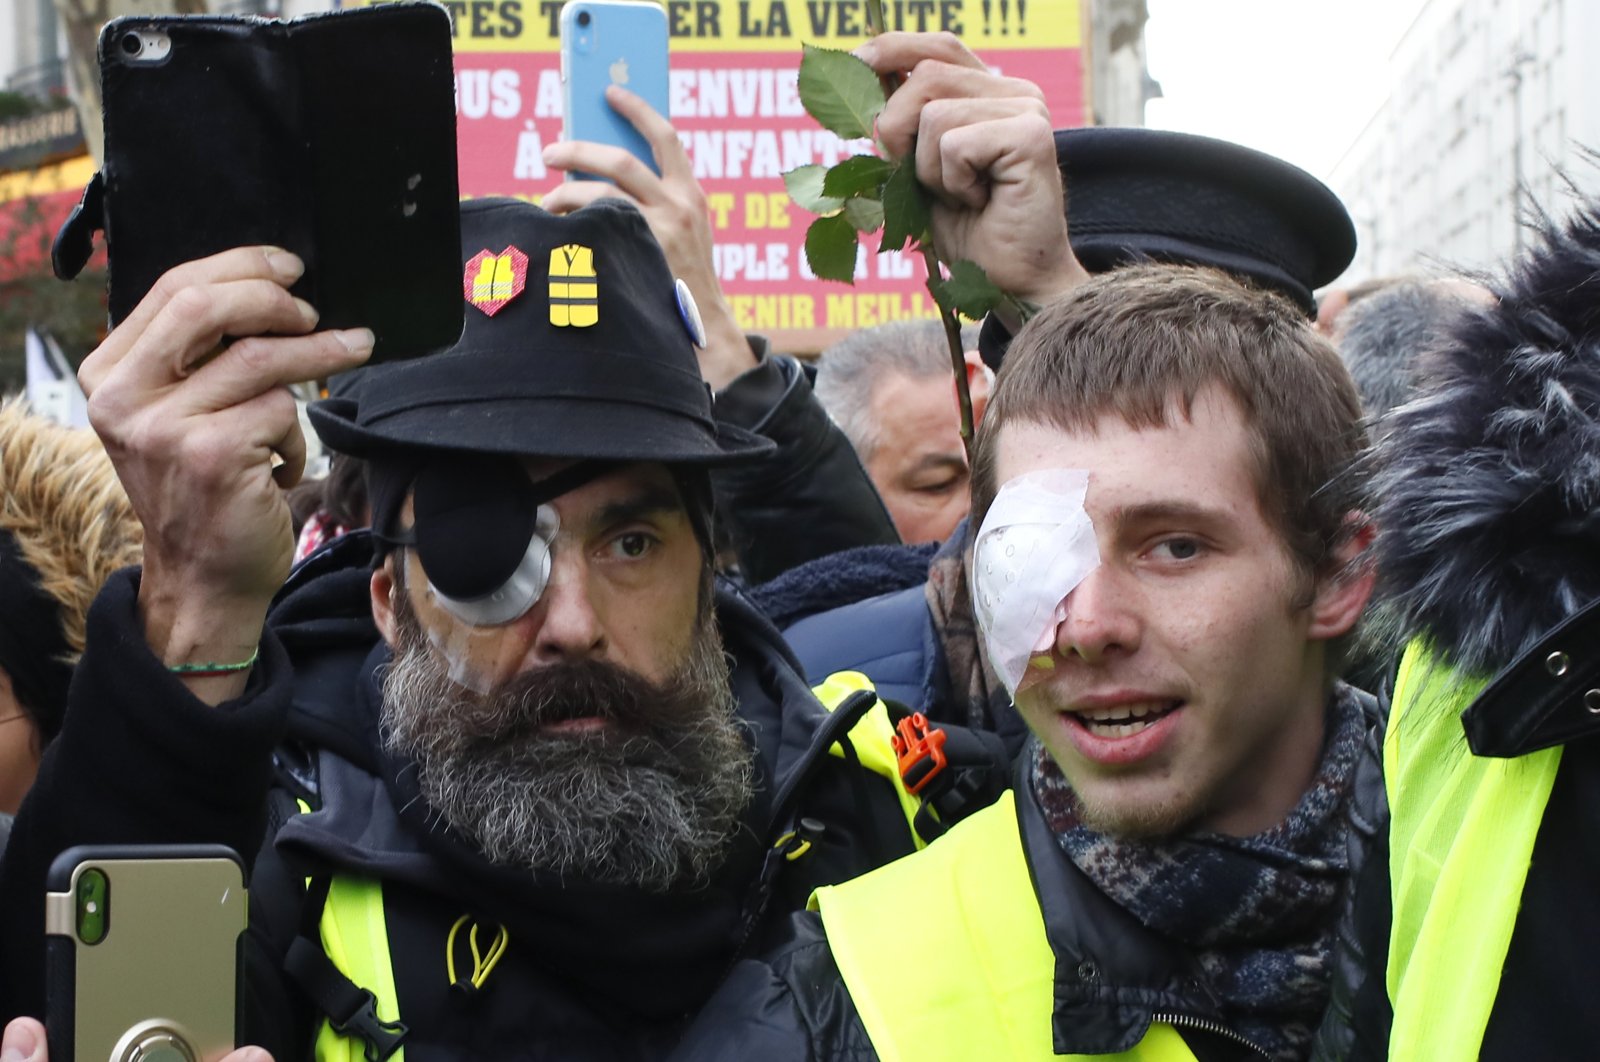 Wounded protest leader Jerome Rodrigues (L) and Franck, no family name given, attend a demonstration of the Yellow Vests in Paris, France, Feb. 2, 2019. (AP File Photo)